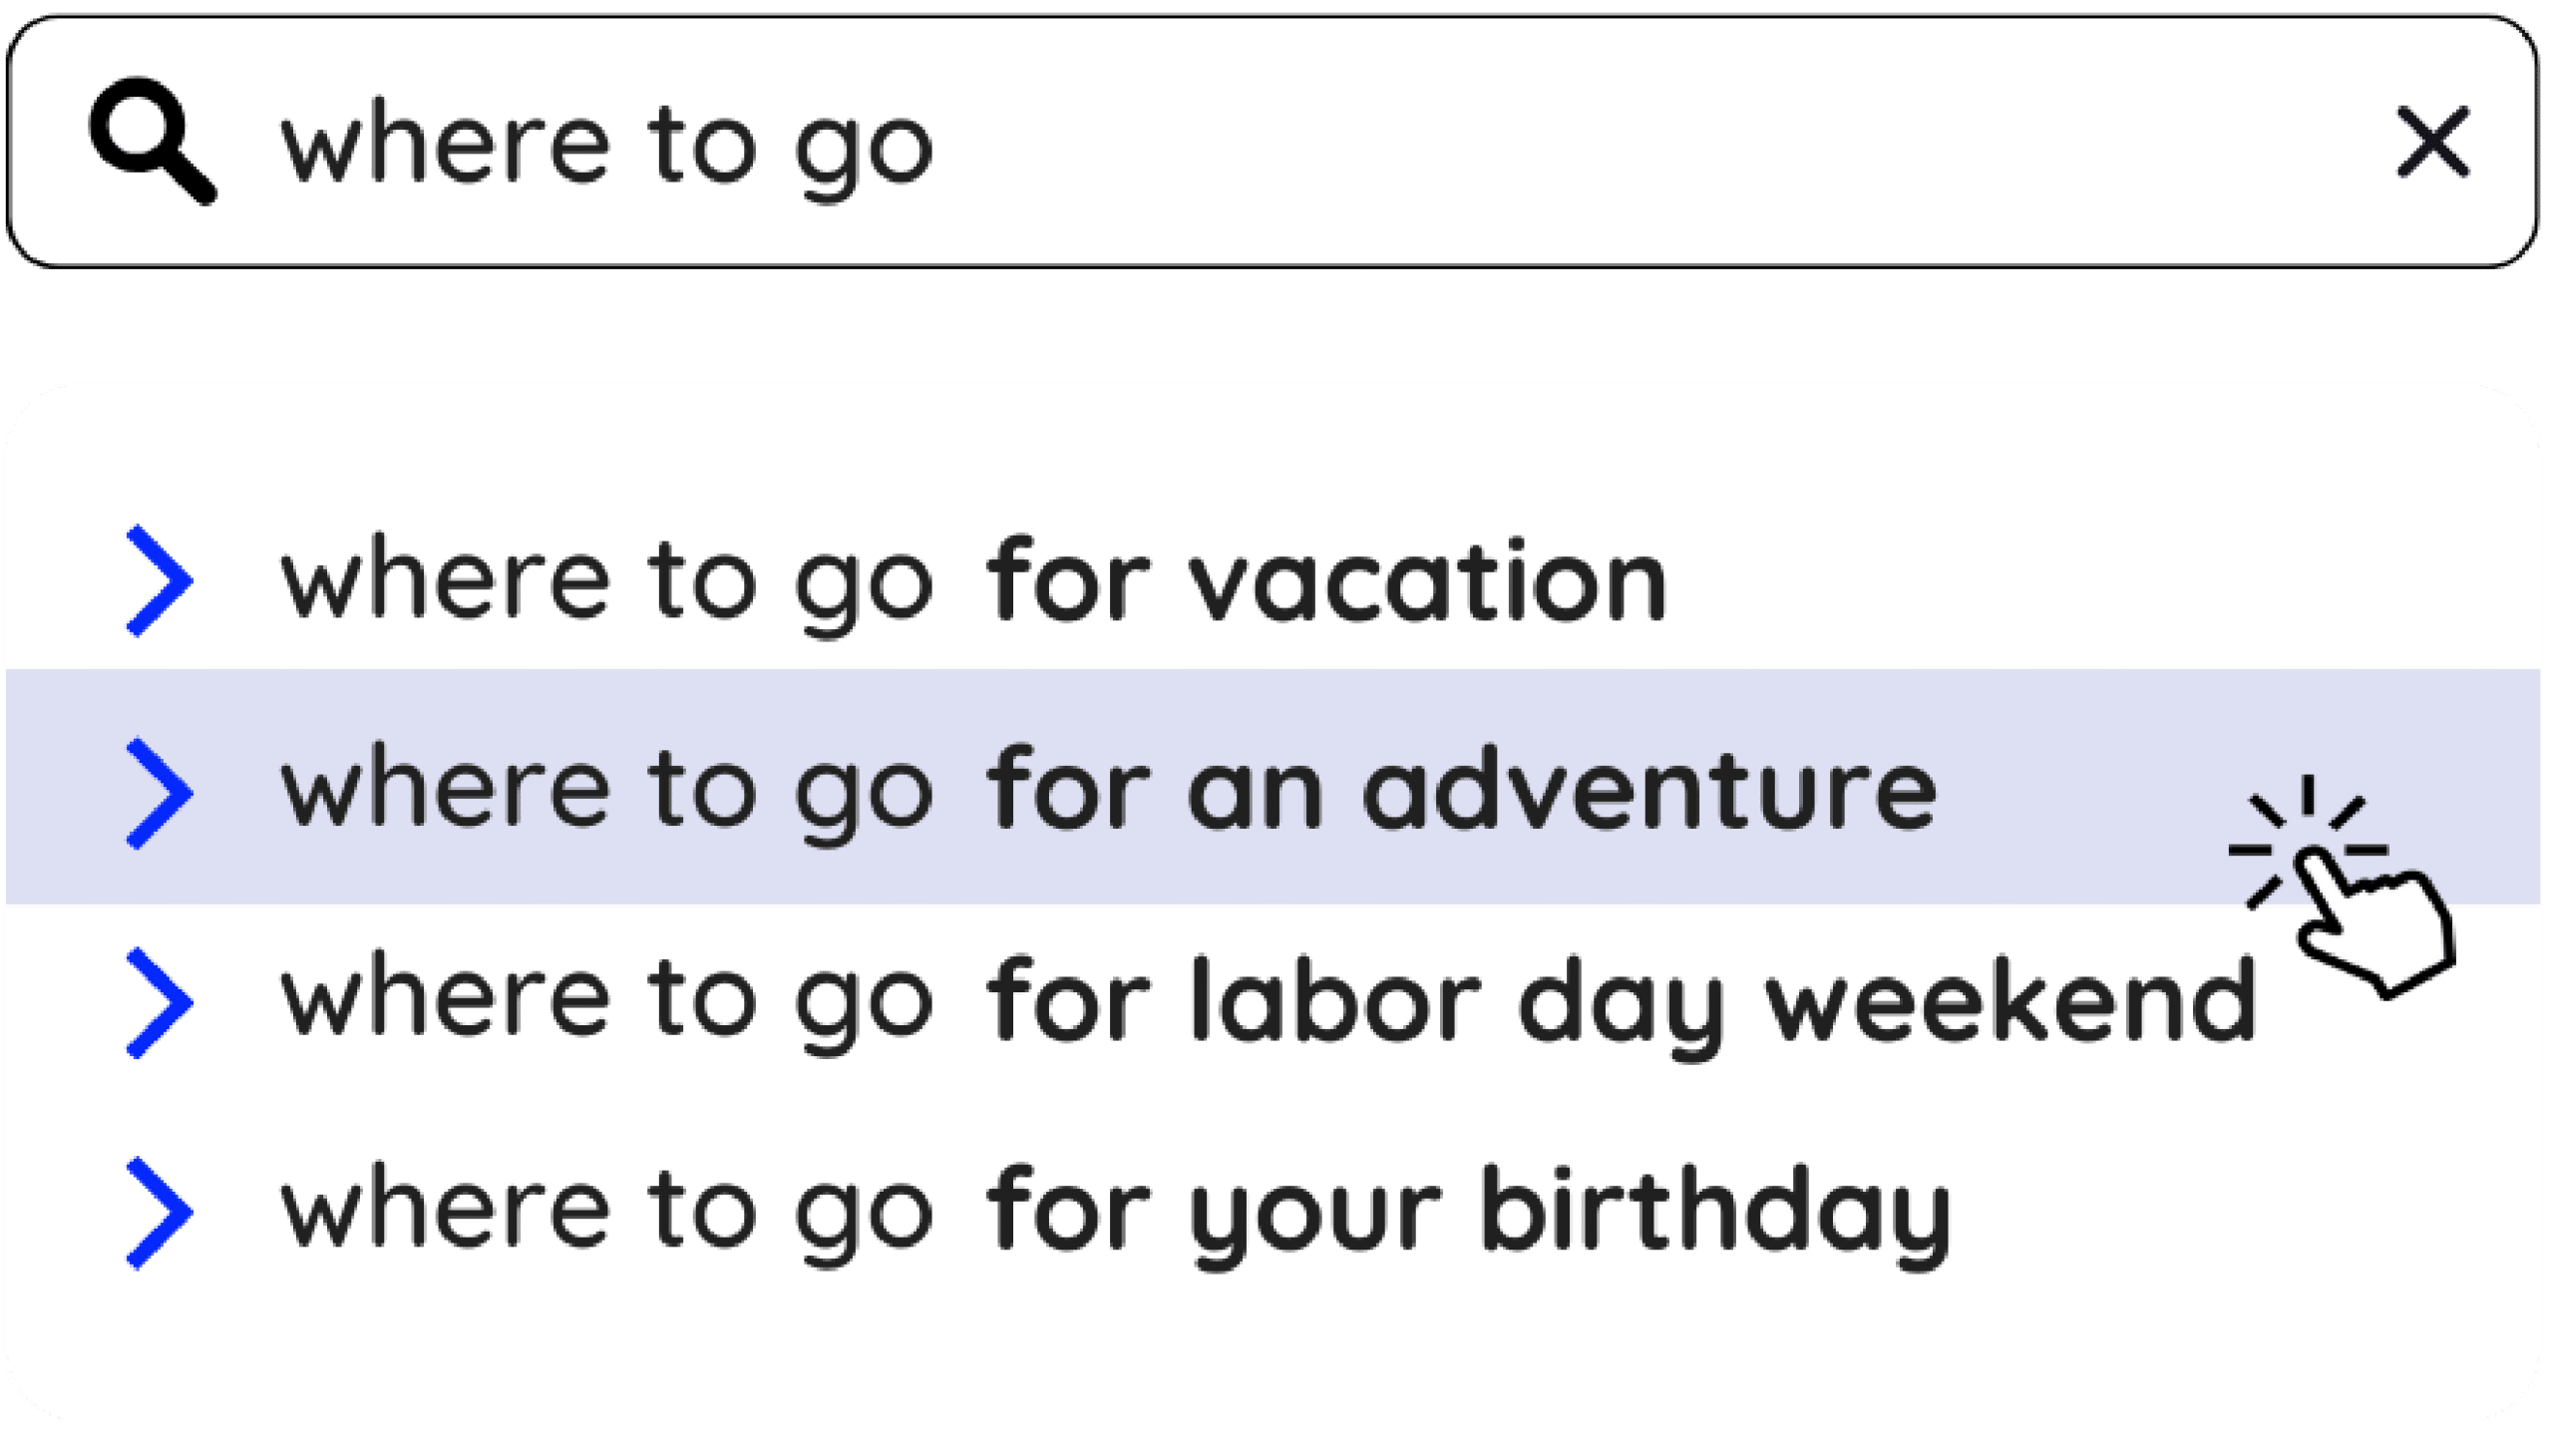 bing search for where to when you want to do something for vacation, birthday, labor day, or have an adventure